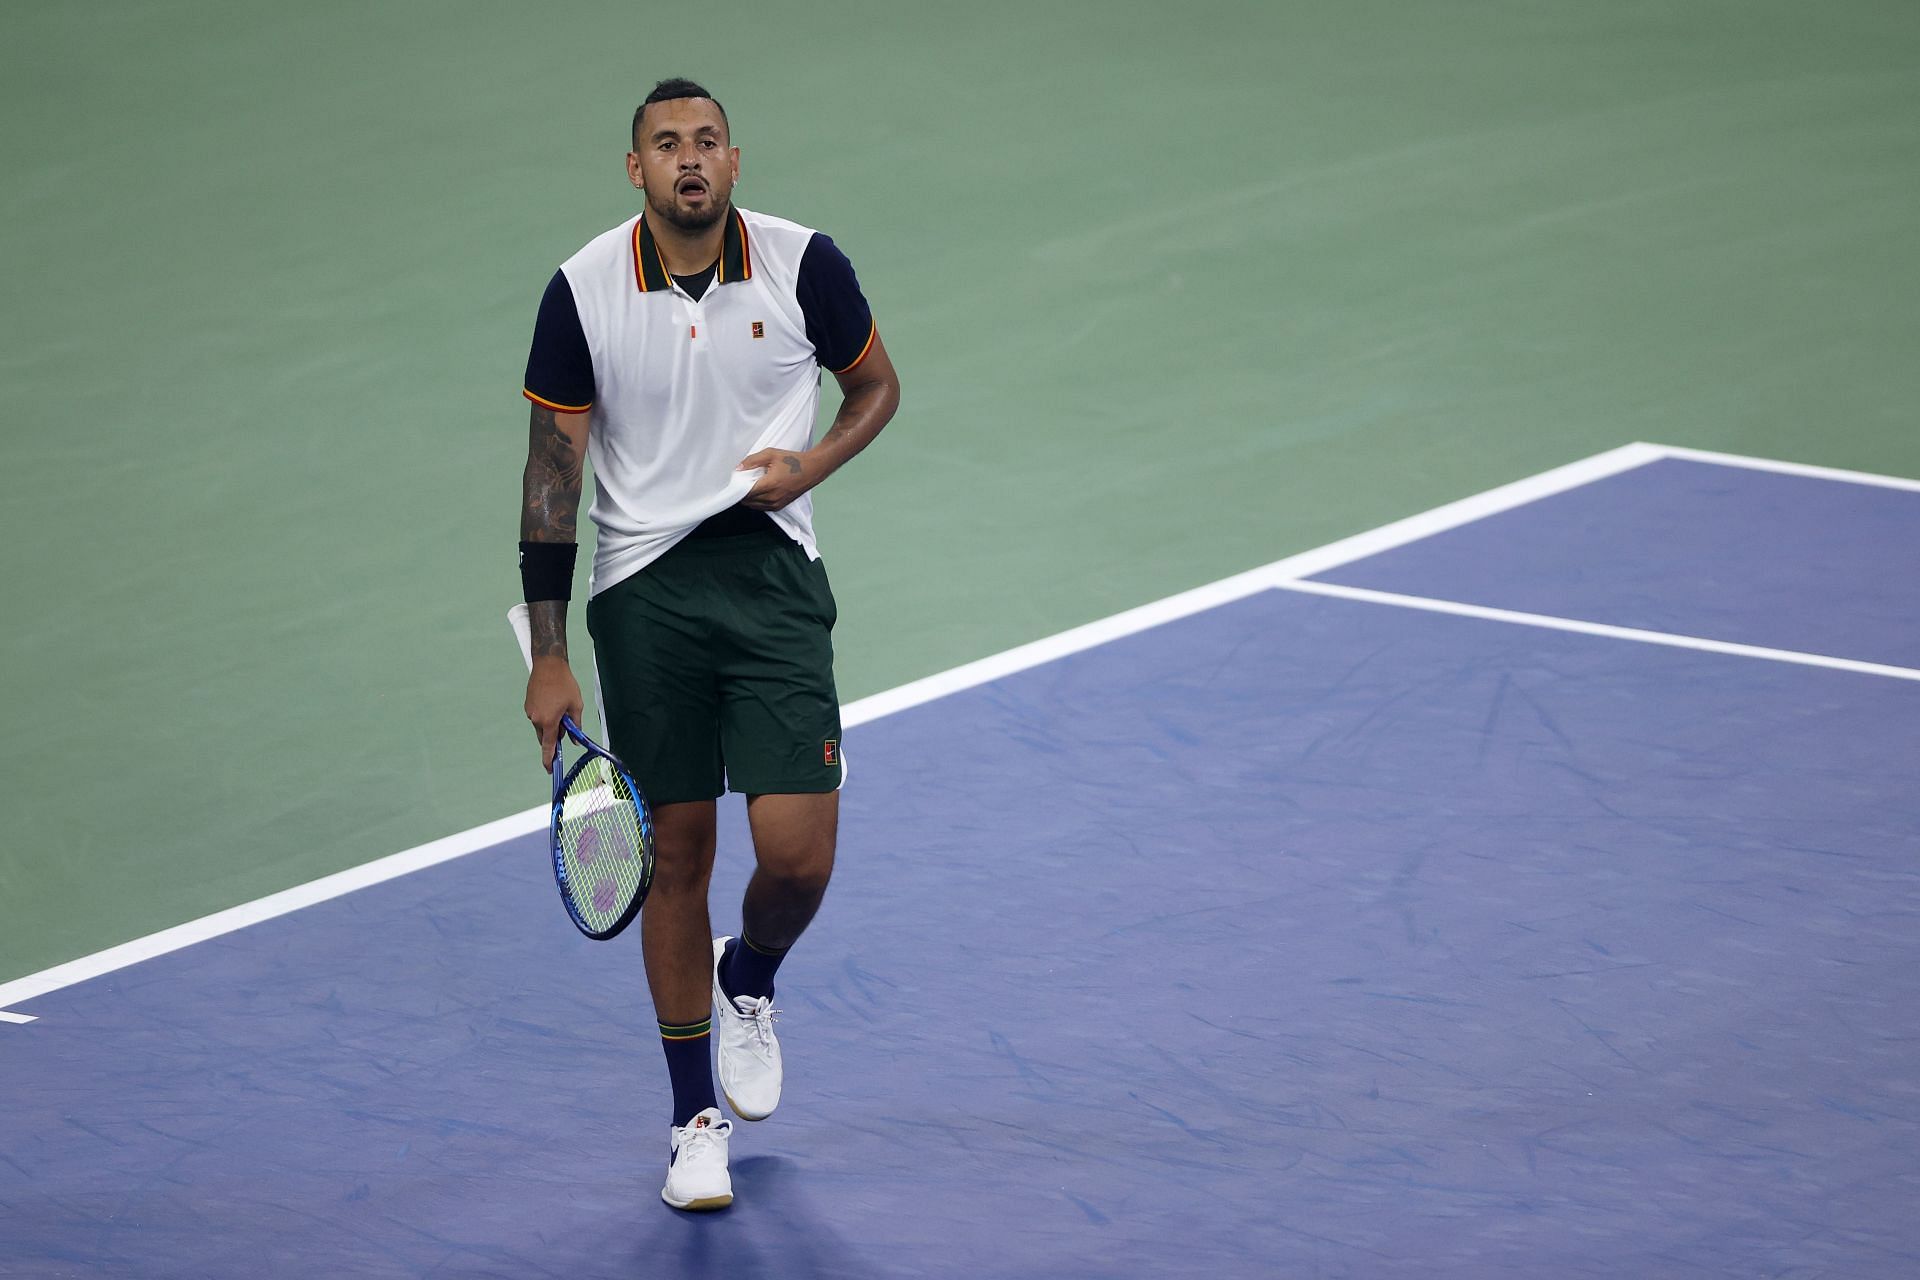 Kyrgios showed remarkable consistency in remaining controversial throughout the year